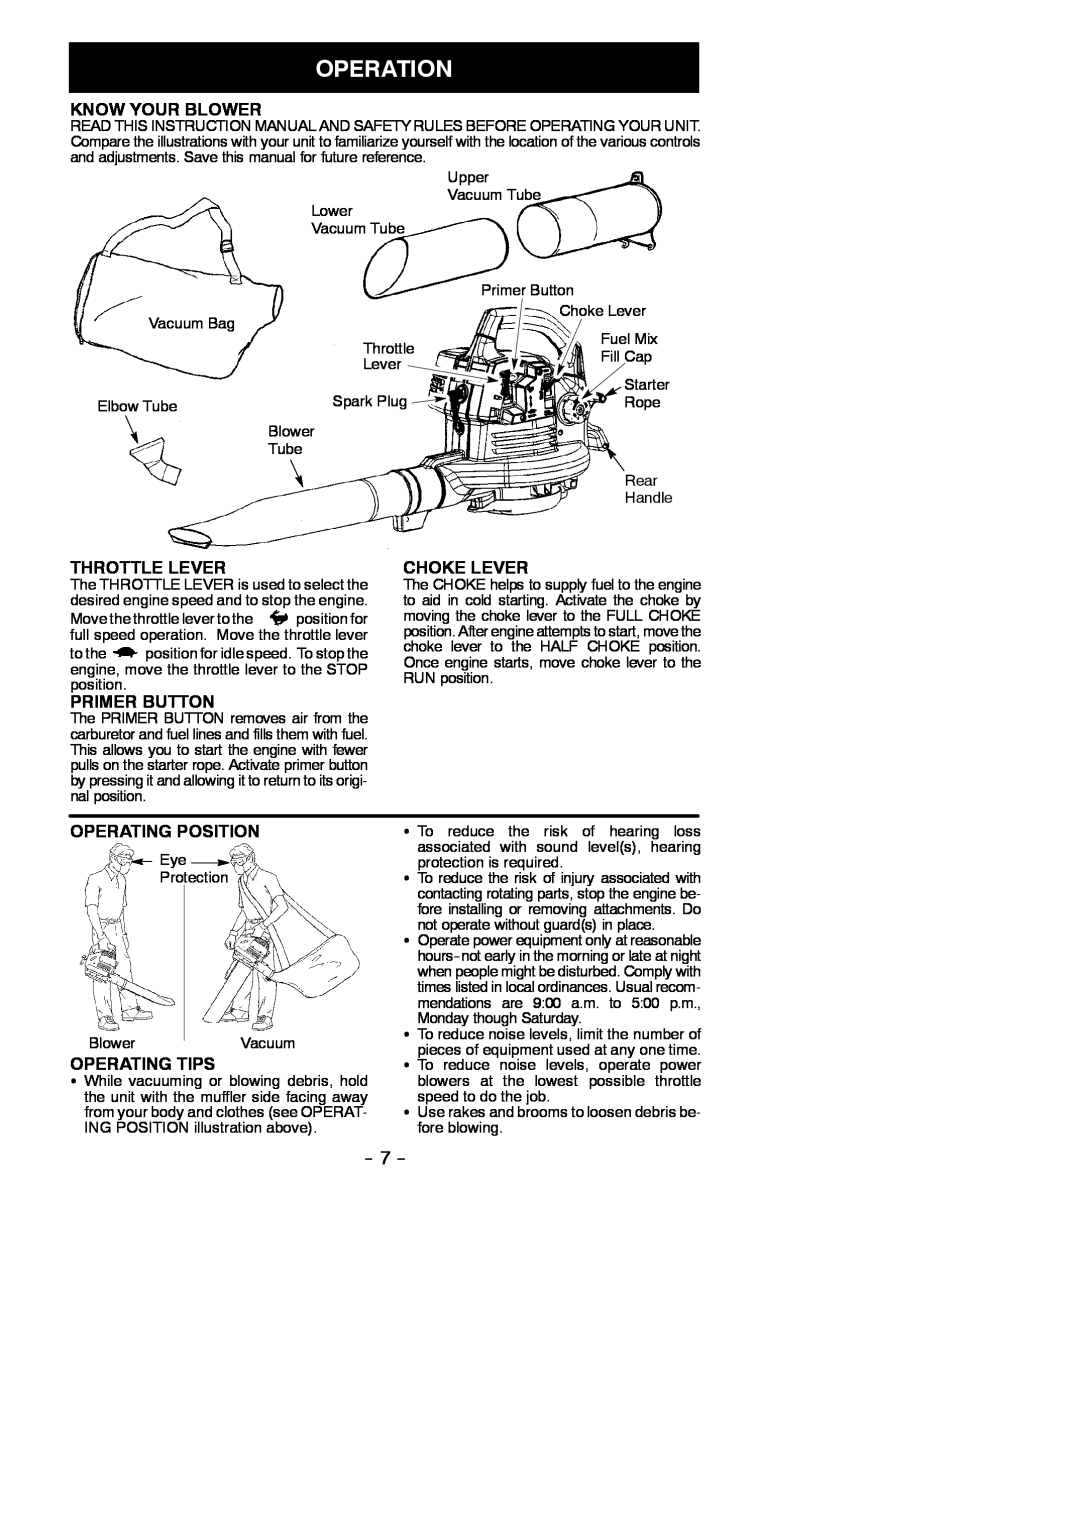 Poulan 545137216 Operation, Know Your Blower, Throttle Lever, Choke Lever, Primer Button, Operating Position 